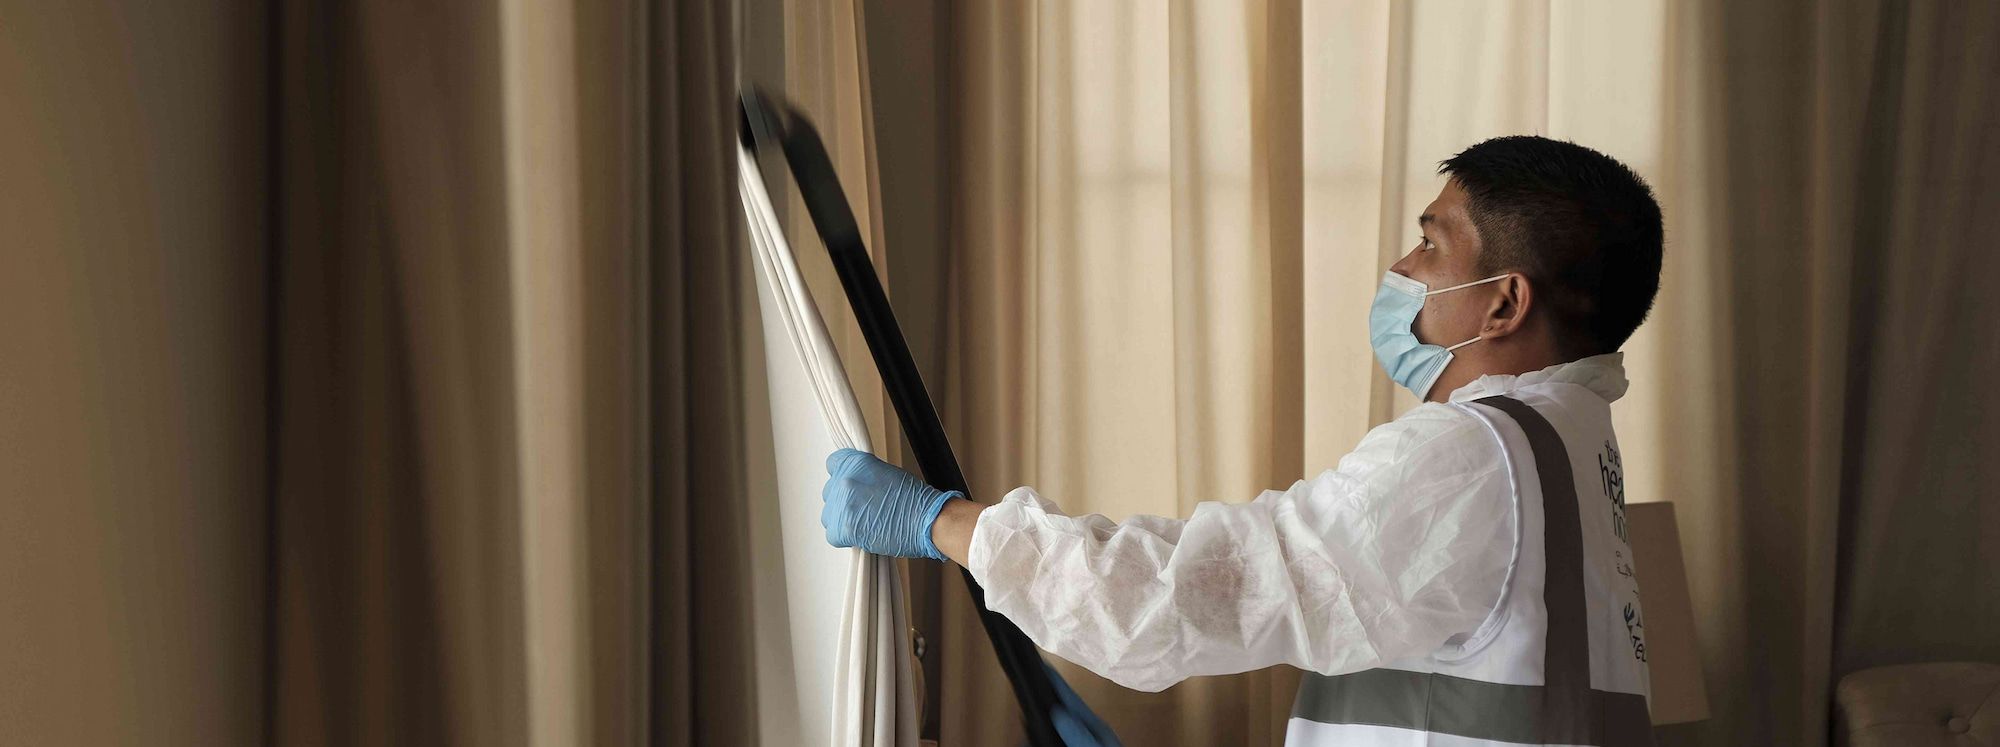 What is the best way to clean curtains? [KSA]